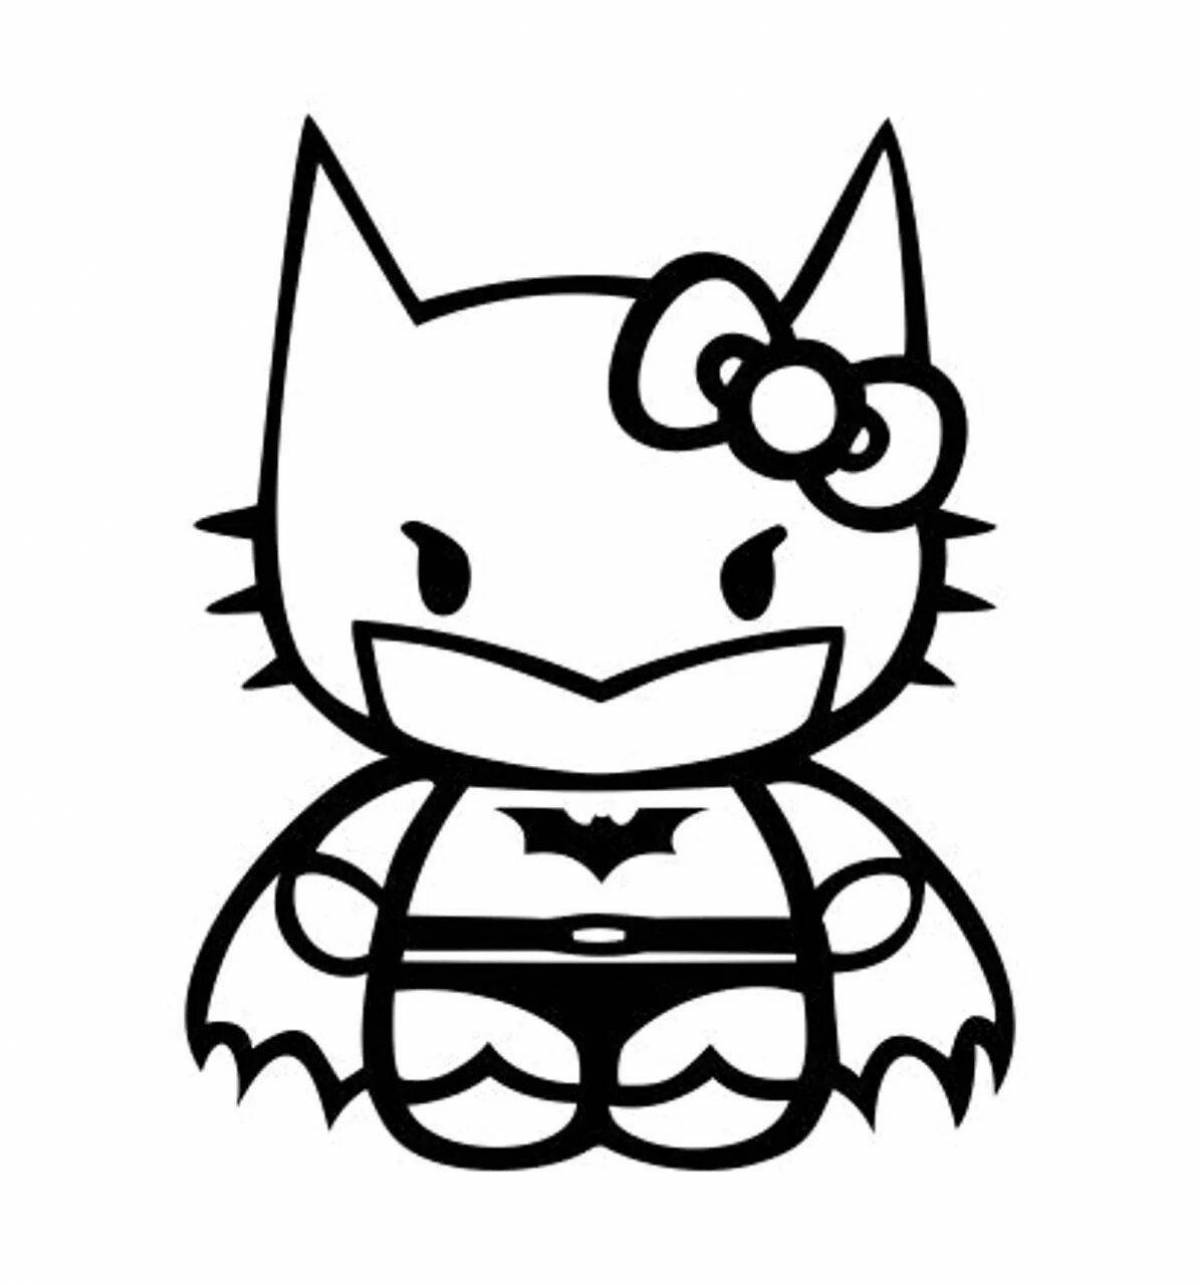 Color-frenzy hello kitty stickers coloring page